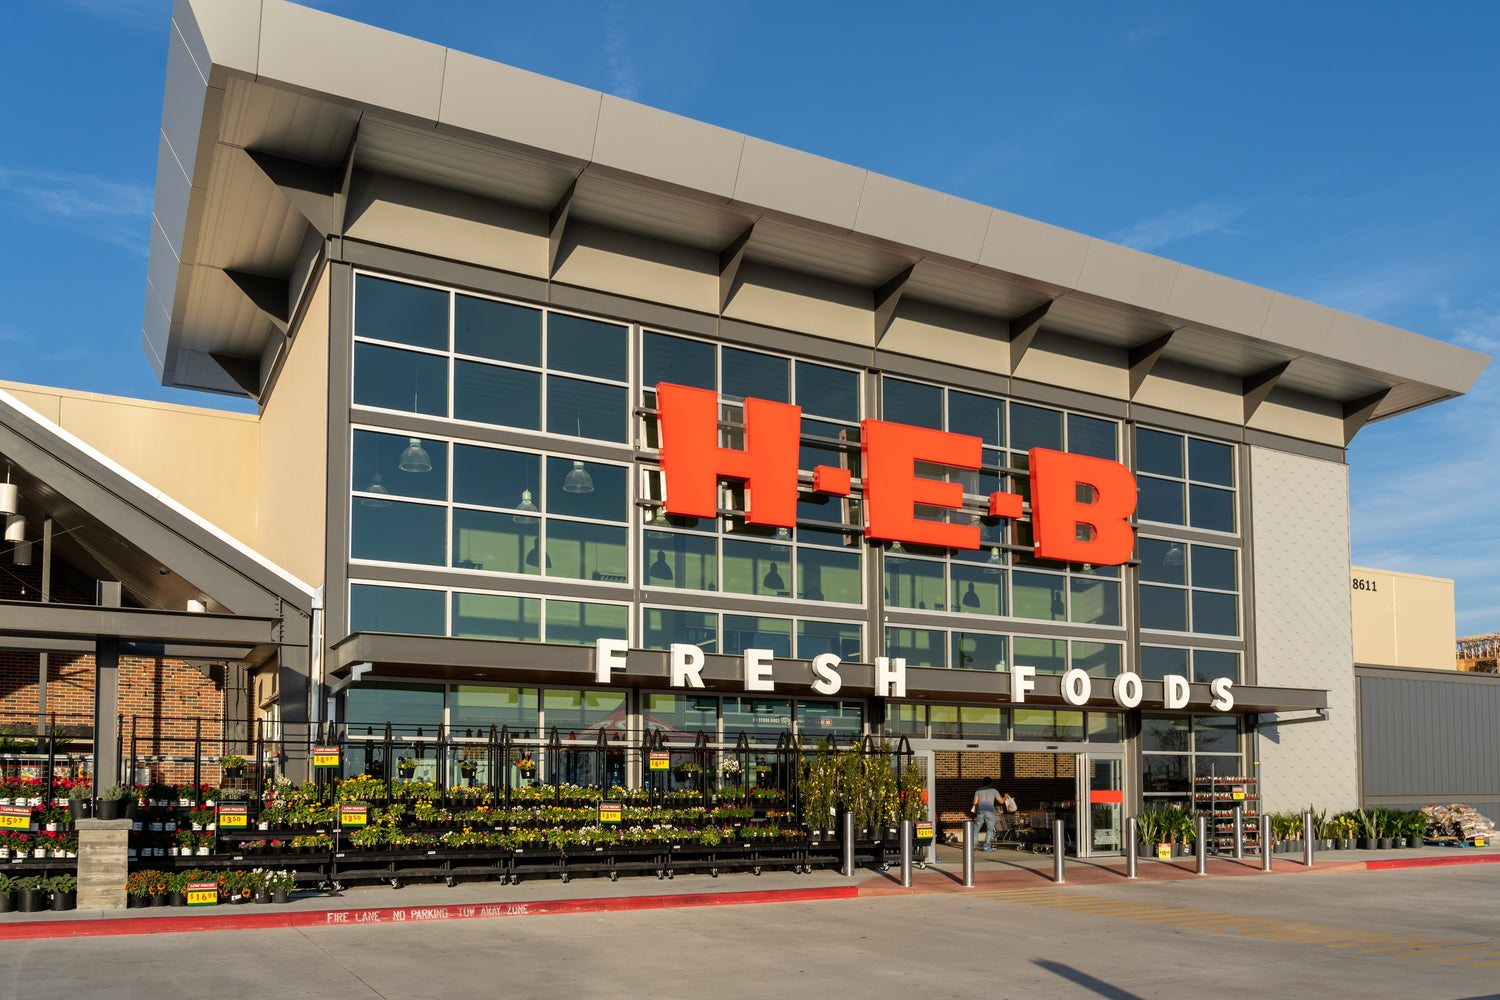 9 Healthy Snacks at H-E-B You Don’t Want to Miss